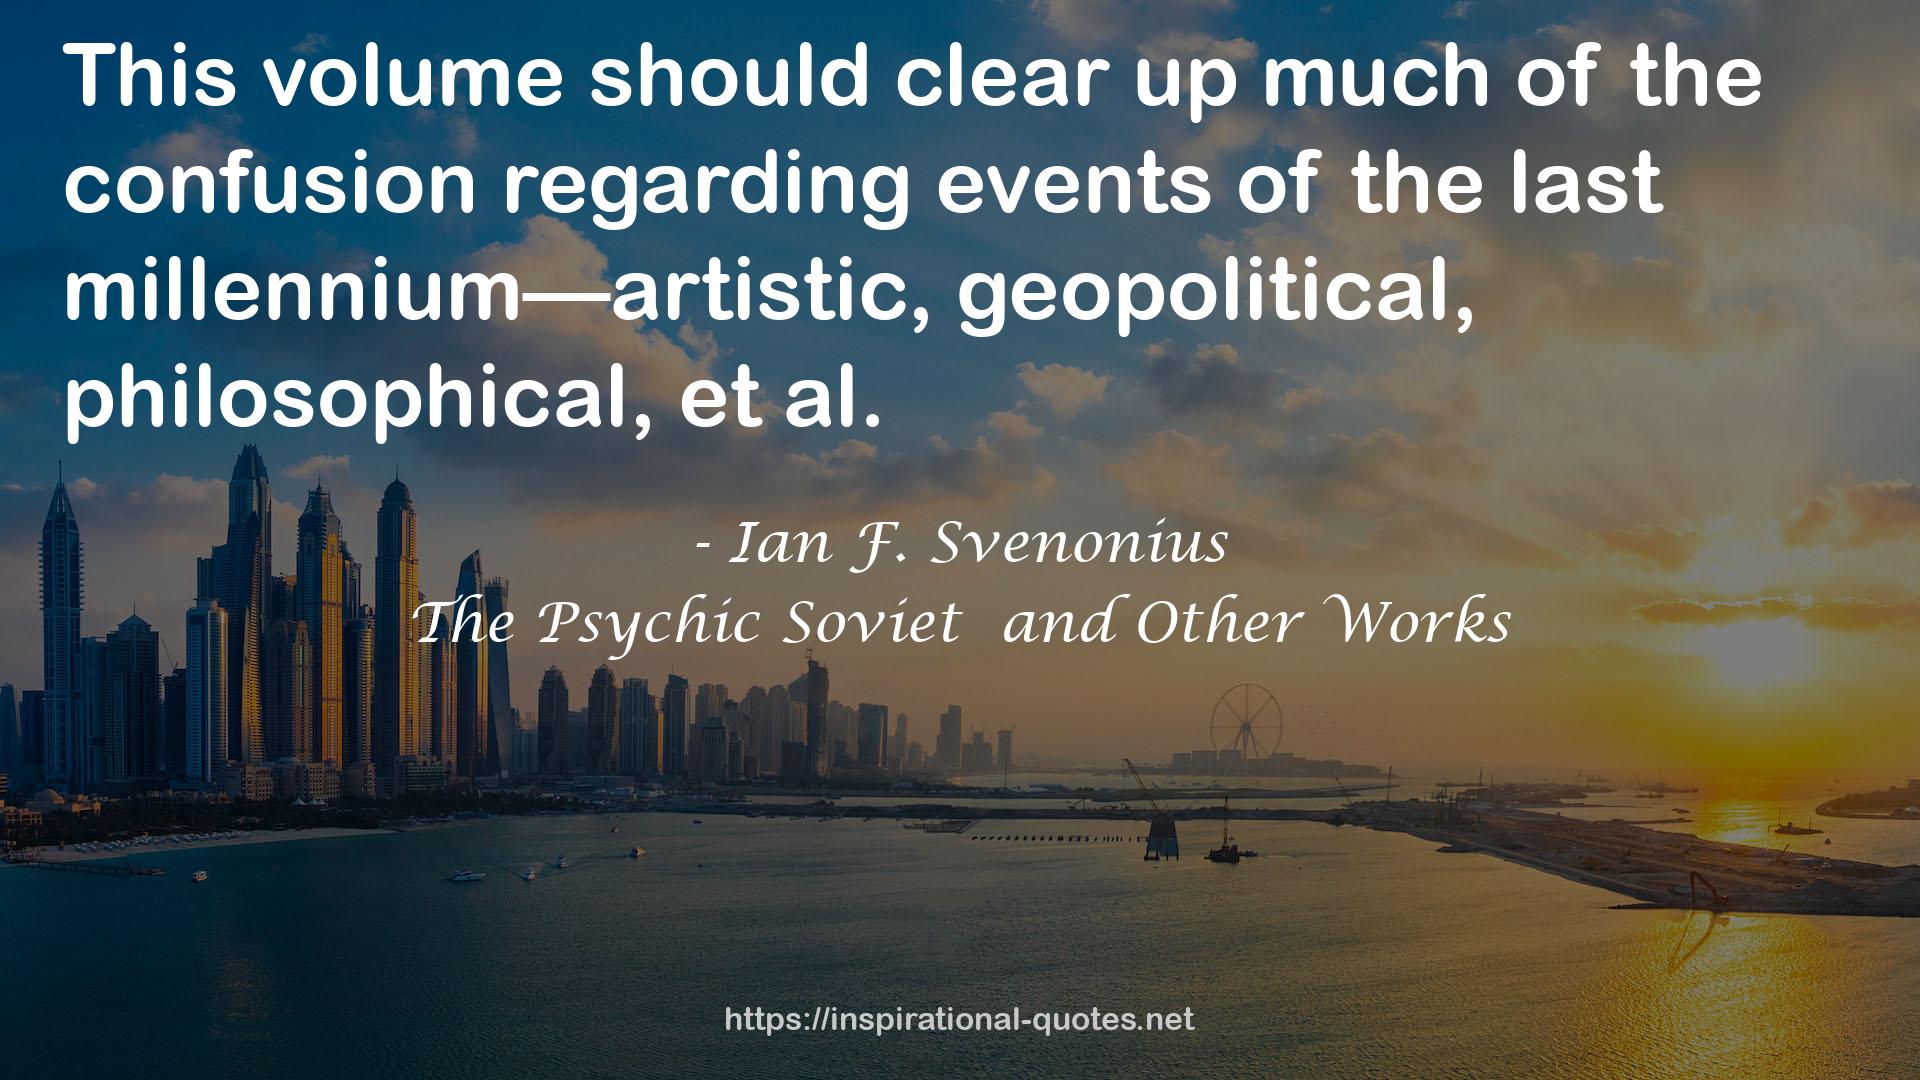 The Psychic Soviet  and Other Works QUOTES